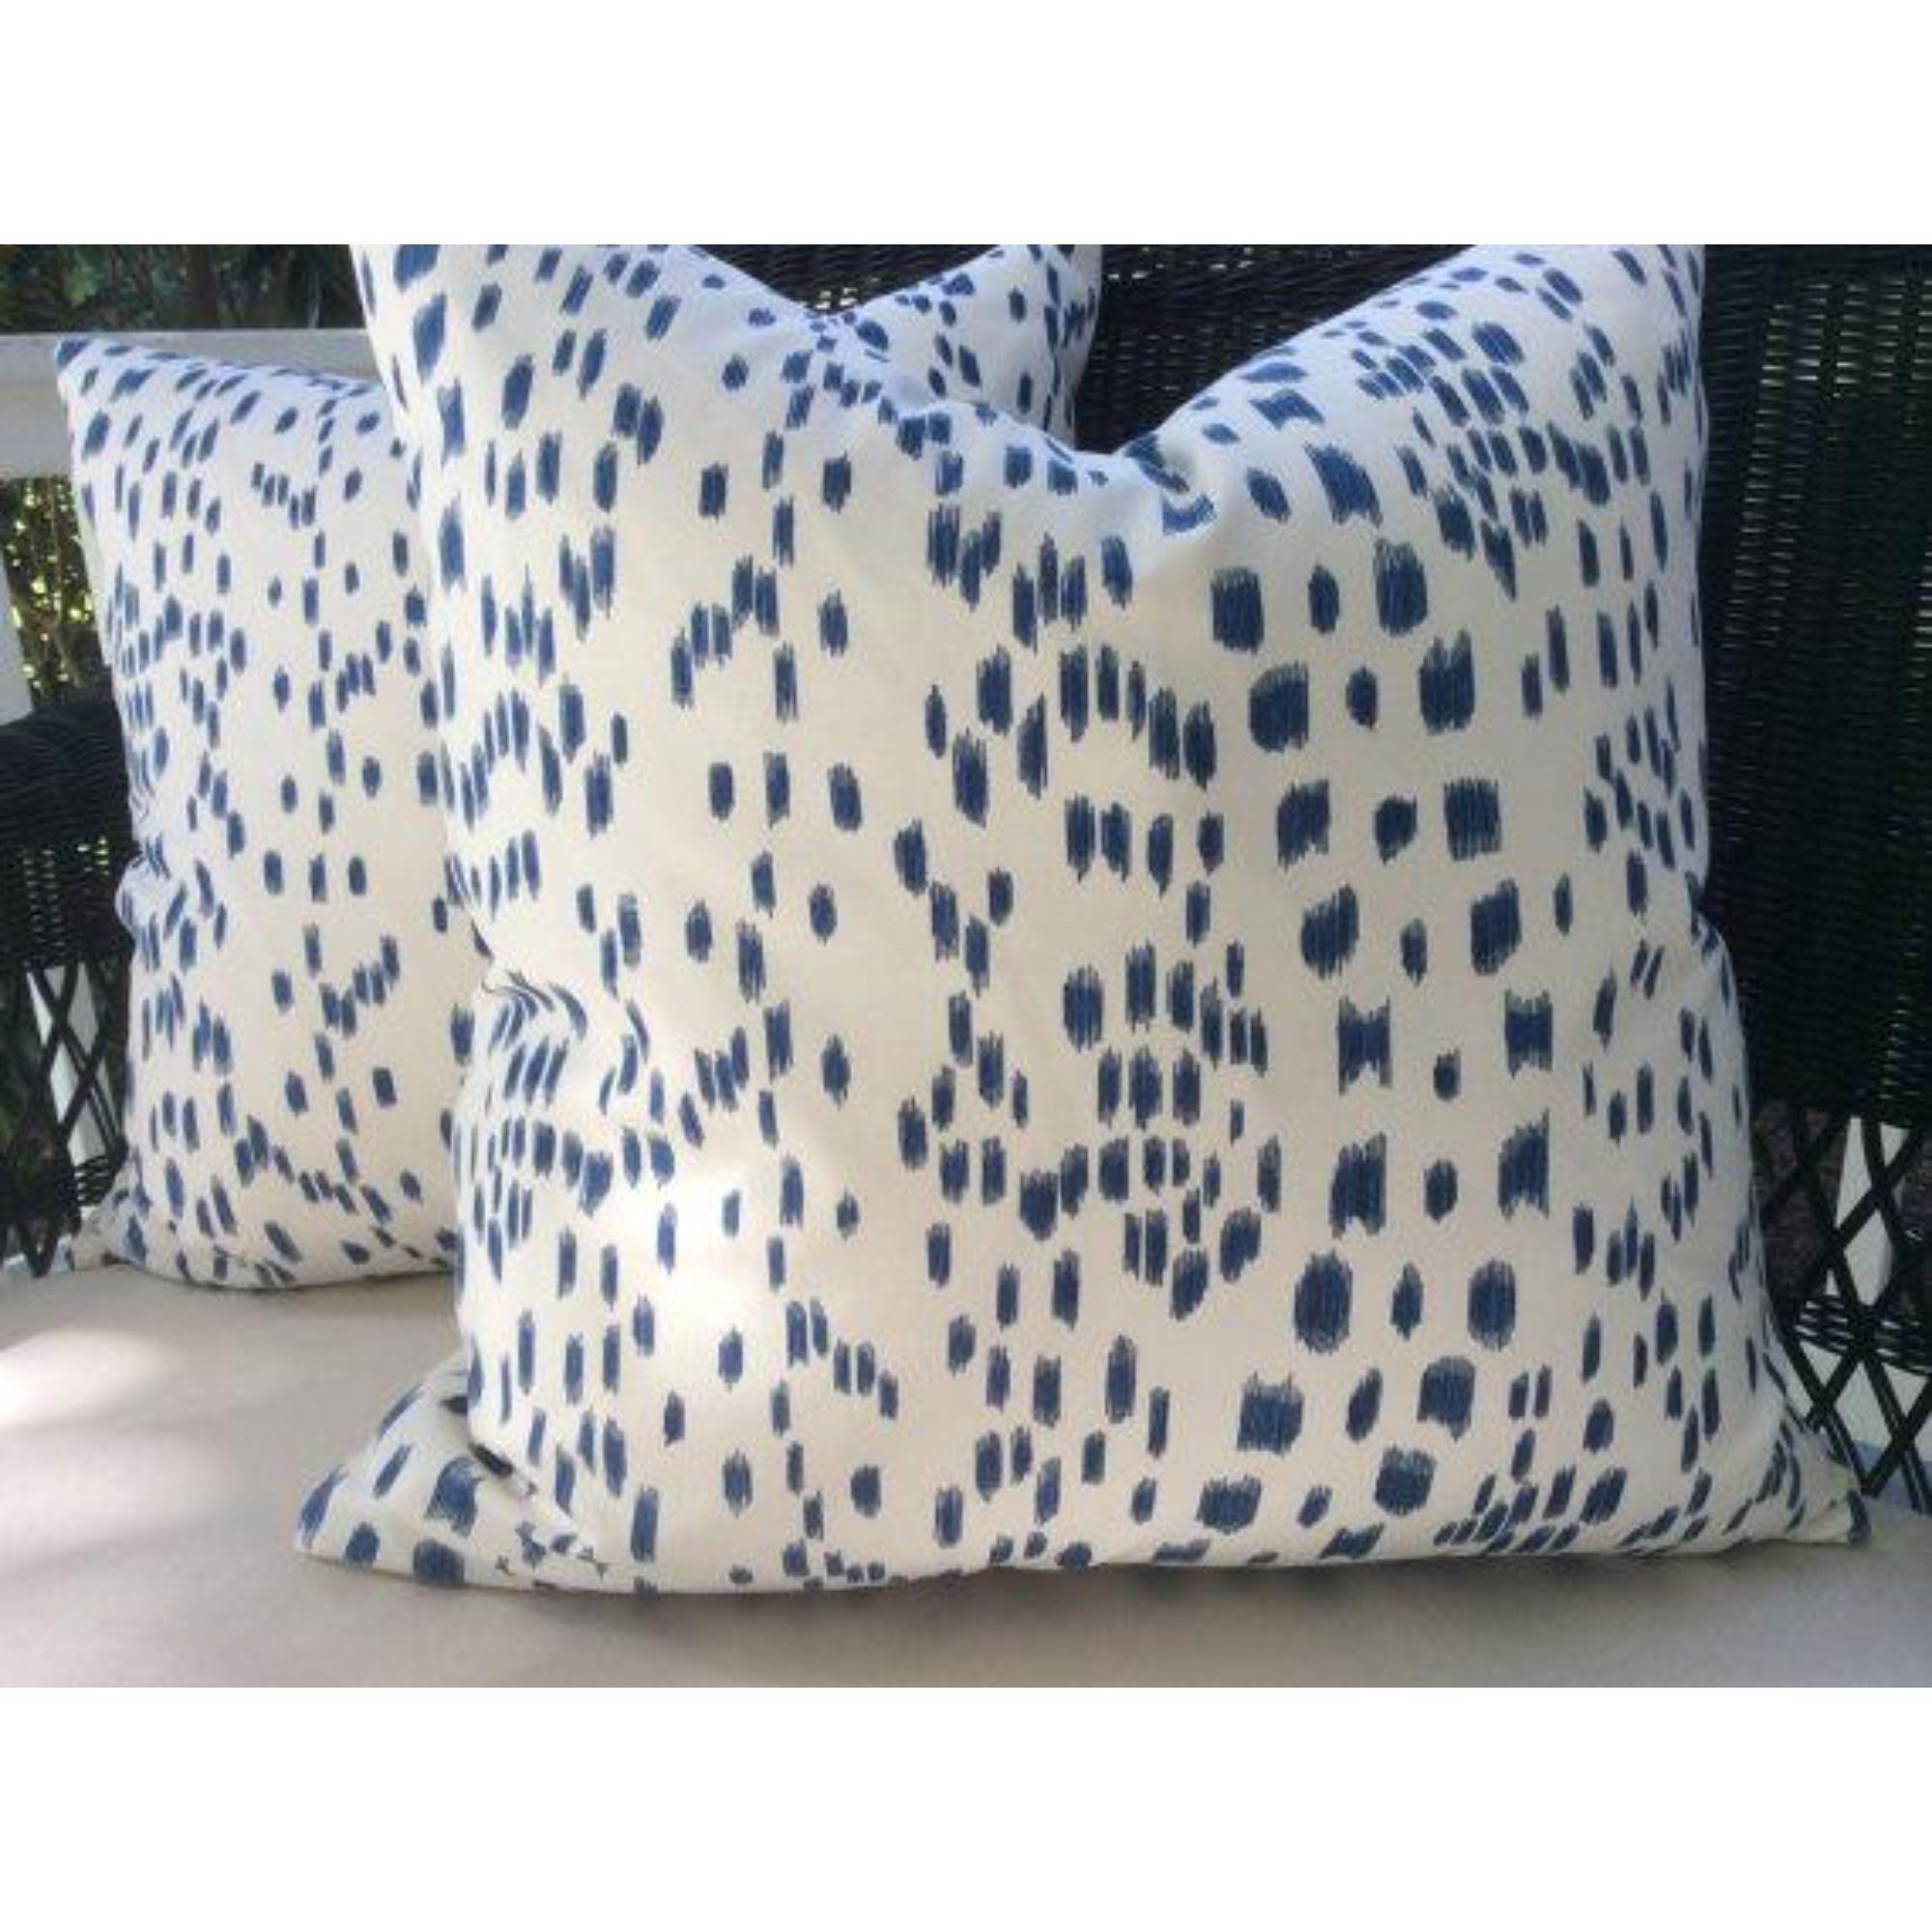 Beautiful and sought after Les Touches fabric from Brunschwig and Fils! This fabulous cotton print has been fashioned into gorgeous pillow covers! Reminiscent of 